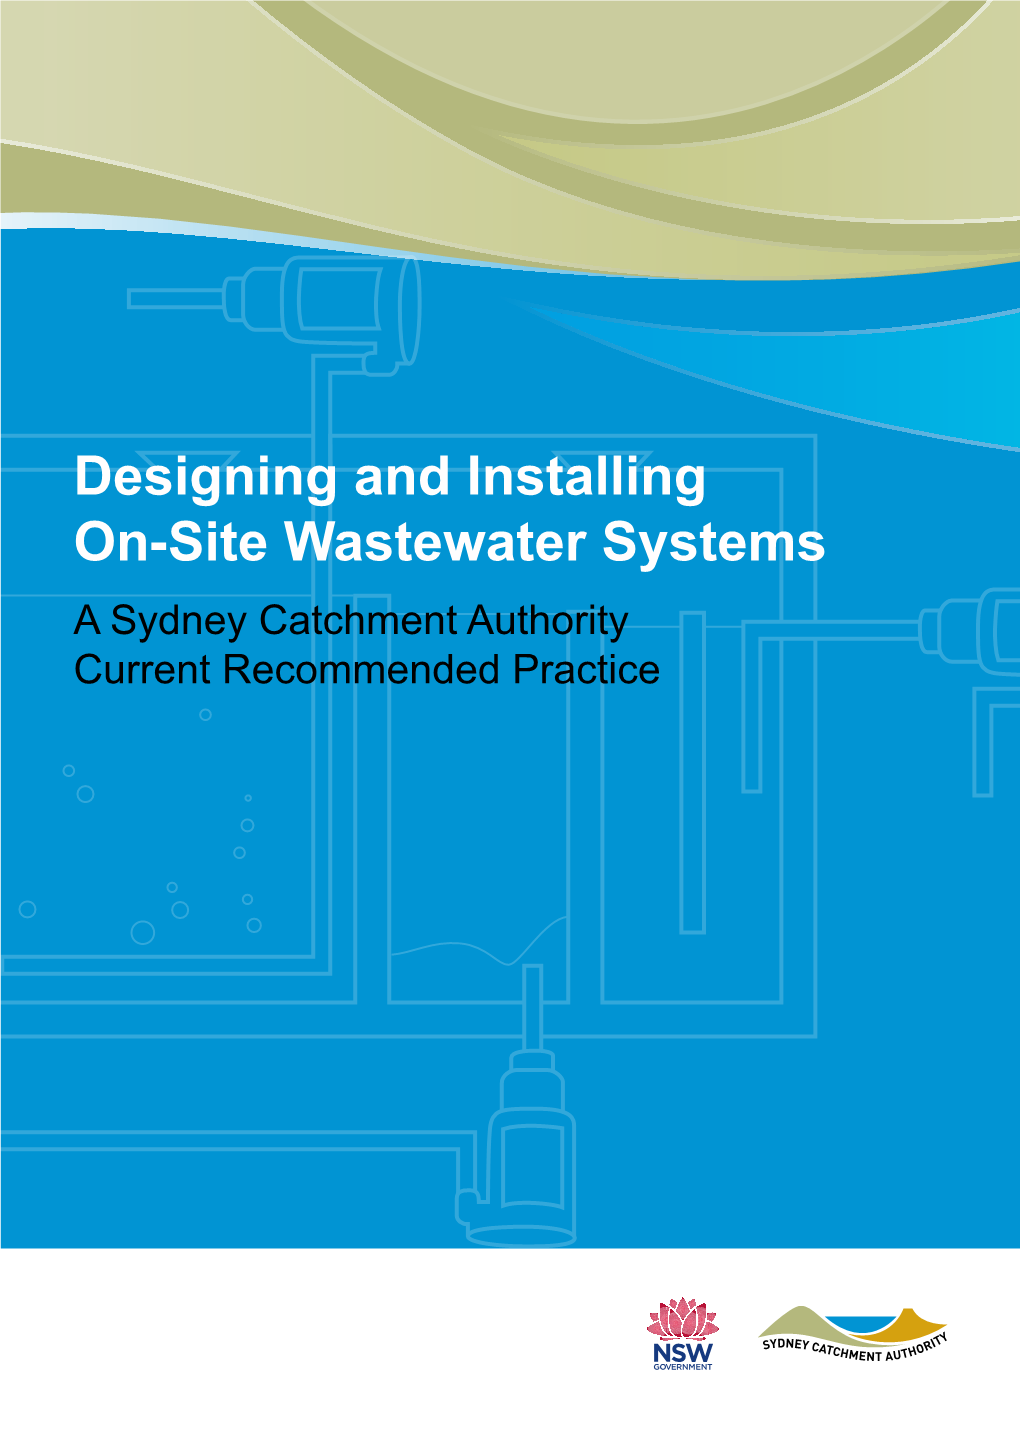 Designing and Installing On-Site Wastewater Systems a Sydney Catchment Authority Current Recommended Practice